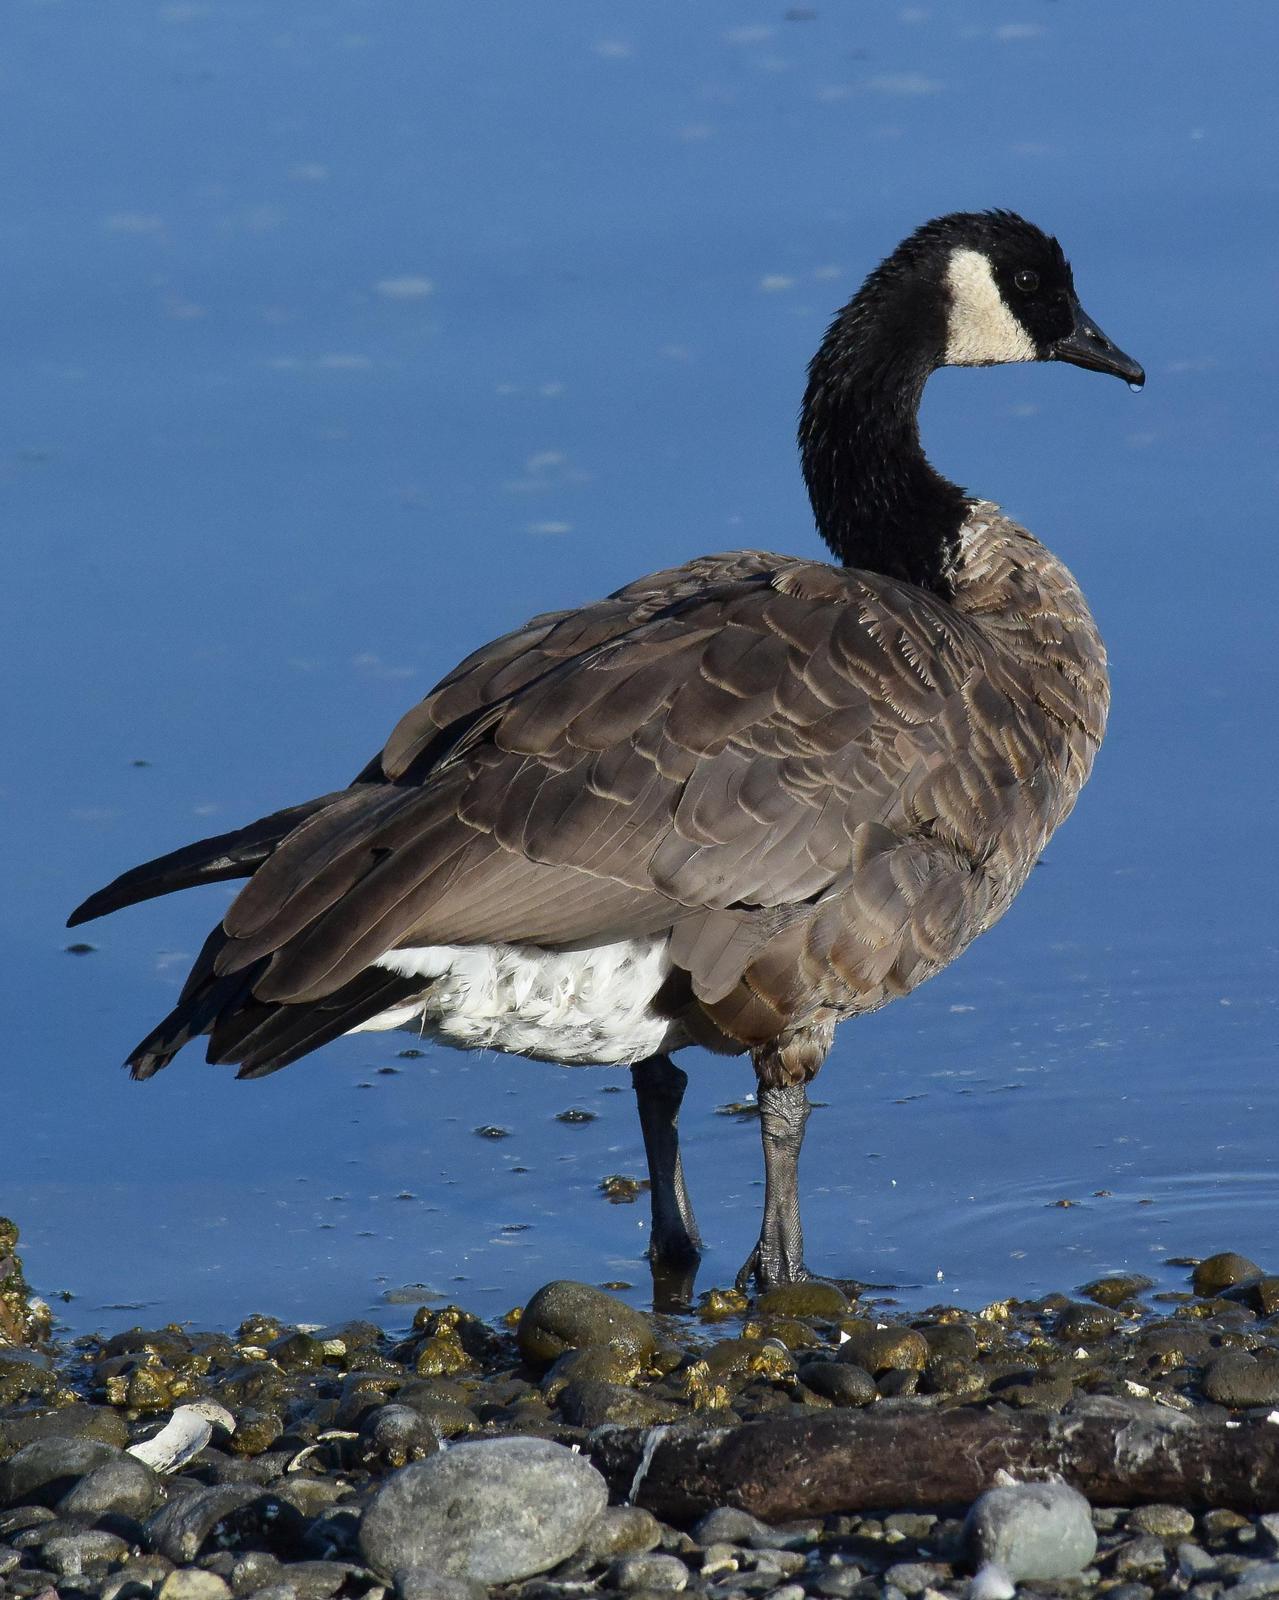 Canada Goose Photo by Emily Percival